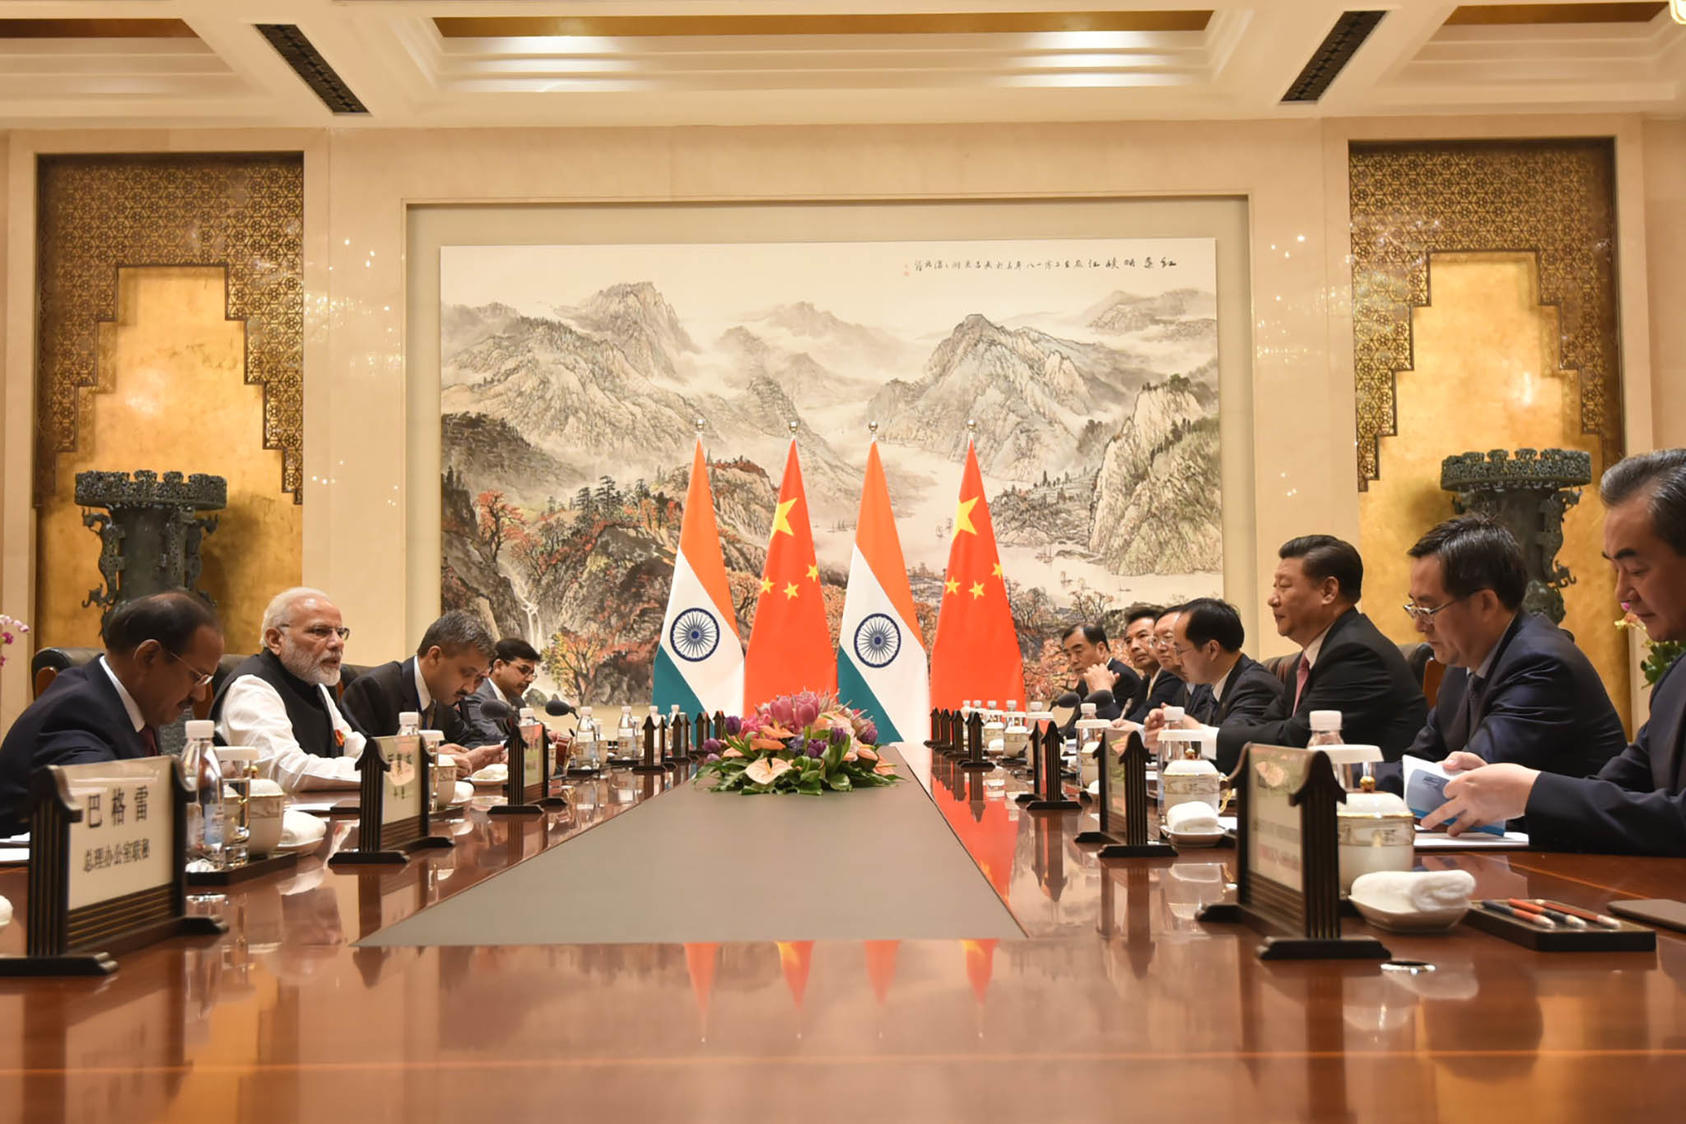 Indian Prime Minister Narendra Modi and Chinese leader Xi Jinping meet in Wuhan, China, April 27, 2018. Even as tensions simmer, both leaders want to prevent an escalation that could lead to conflict. (Indian Ministry of External Affairs)